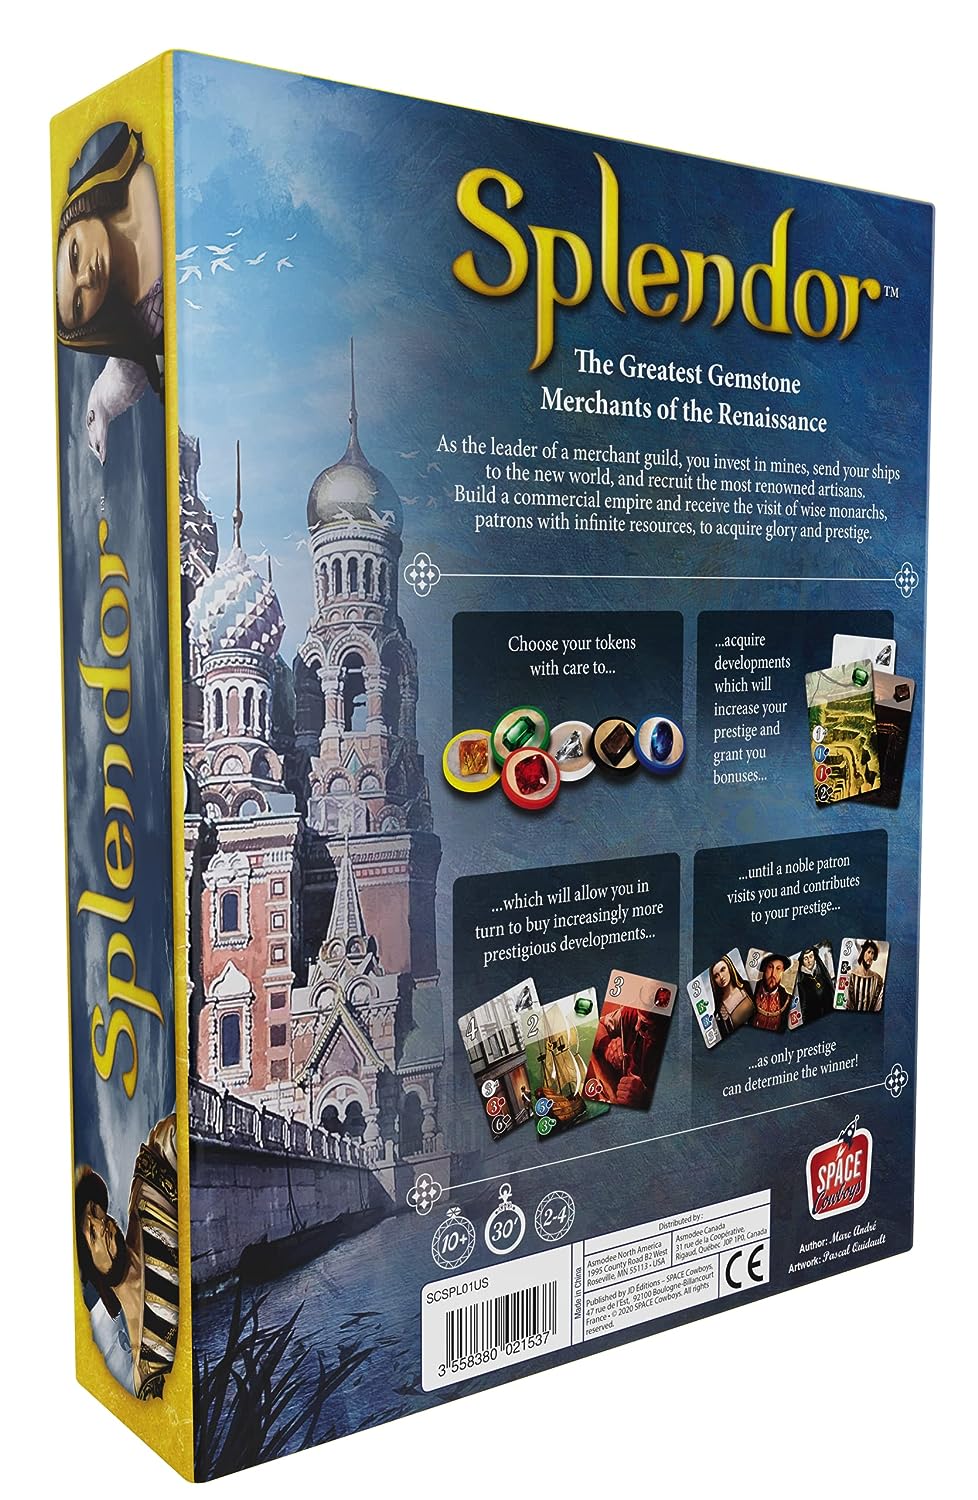 Kids Mandi Splendor board game with colorful gemstones and cards.